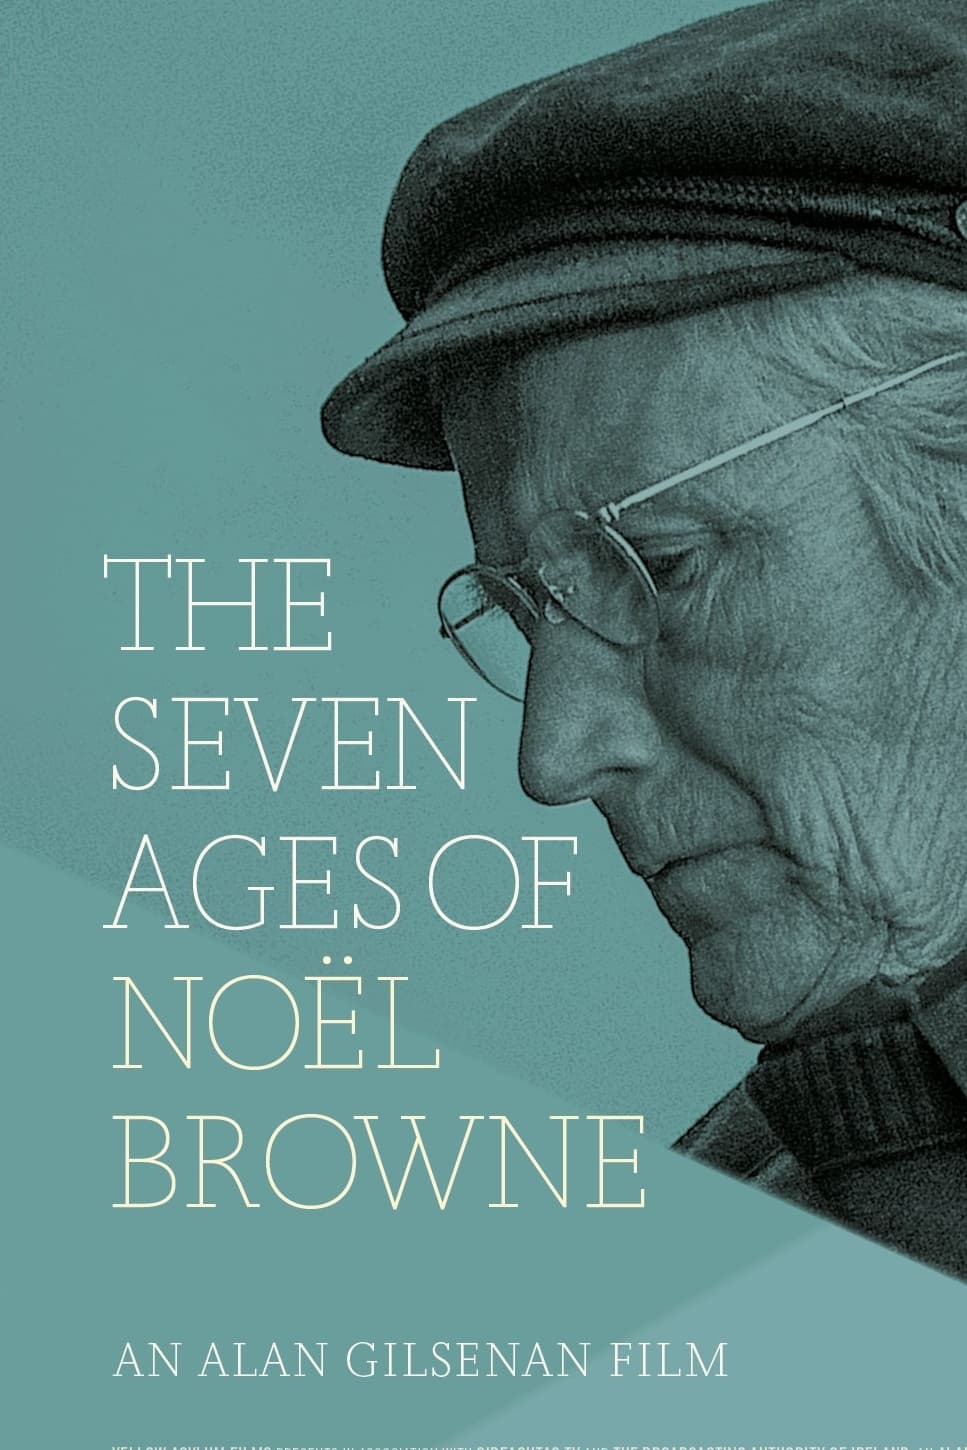 The Seven Ages of Noël Browne